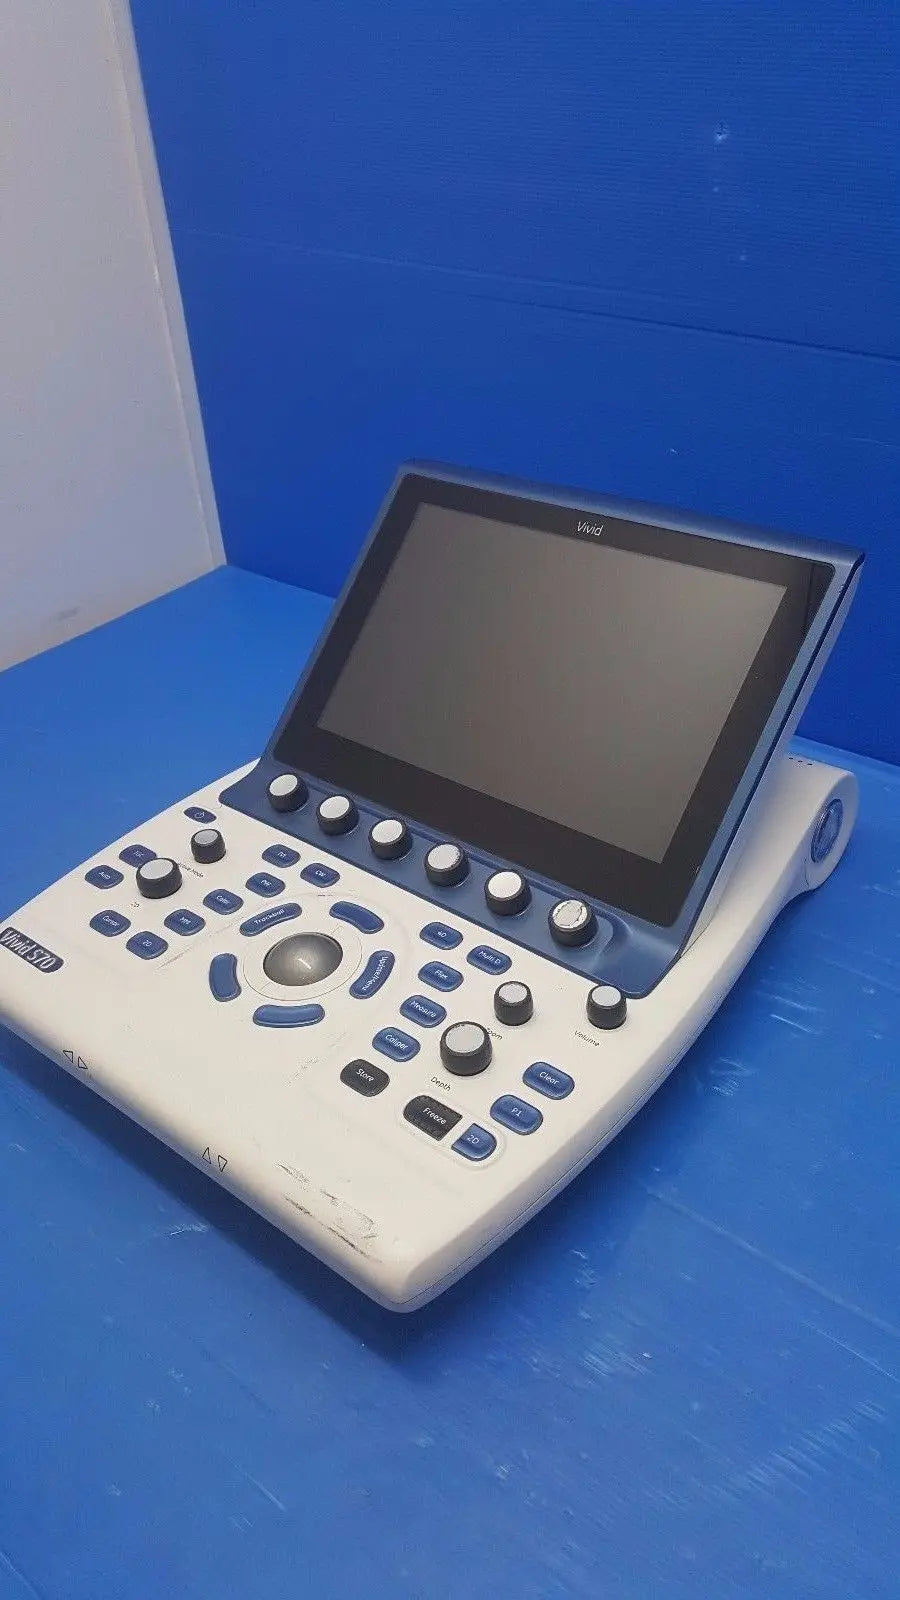 GE VIVID S60/S70 Ultrasound System Keyboard P/N 5460319 w/ Touchscreen Assy DIAGNOSTIC ULTRASOUND MACHINES FOR SALE